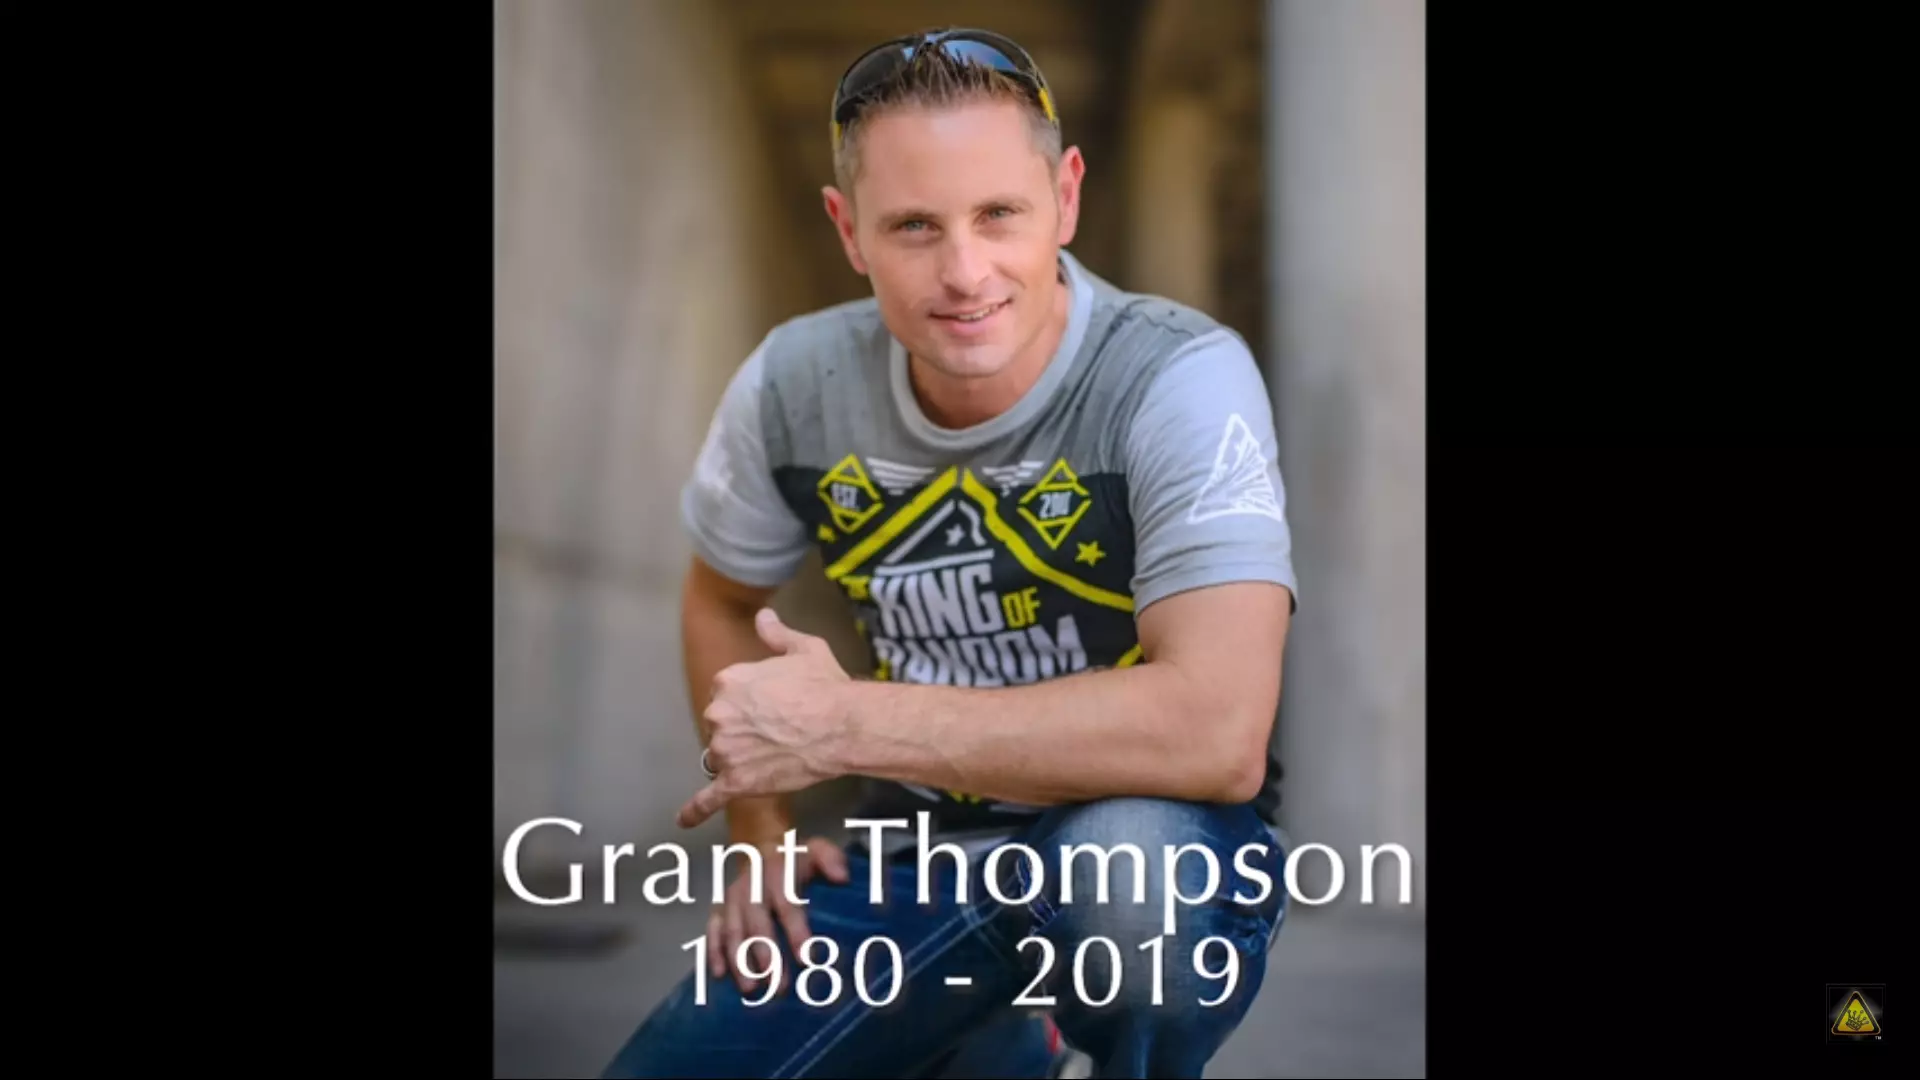 ​Grant Thompson Death: YouTube King Of Random Star Dies Aged 38 In Paragliding Accident